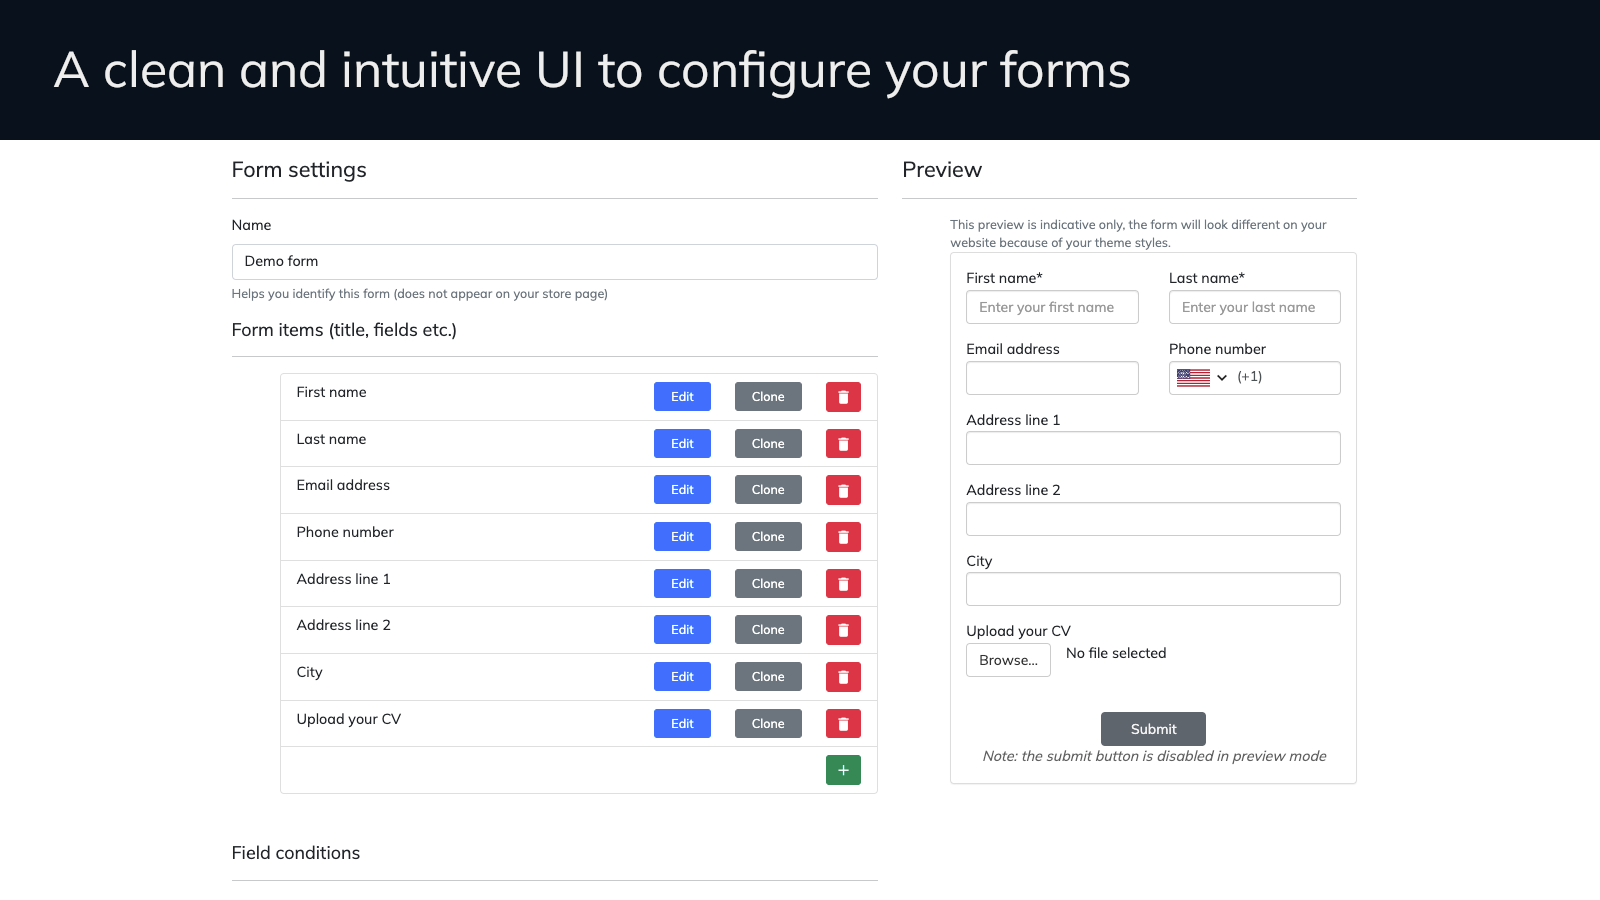 A clean and intuitive UI to configure your forms